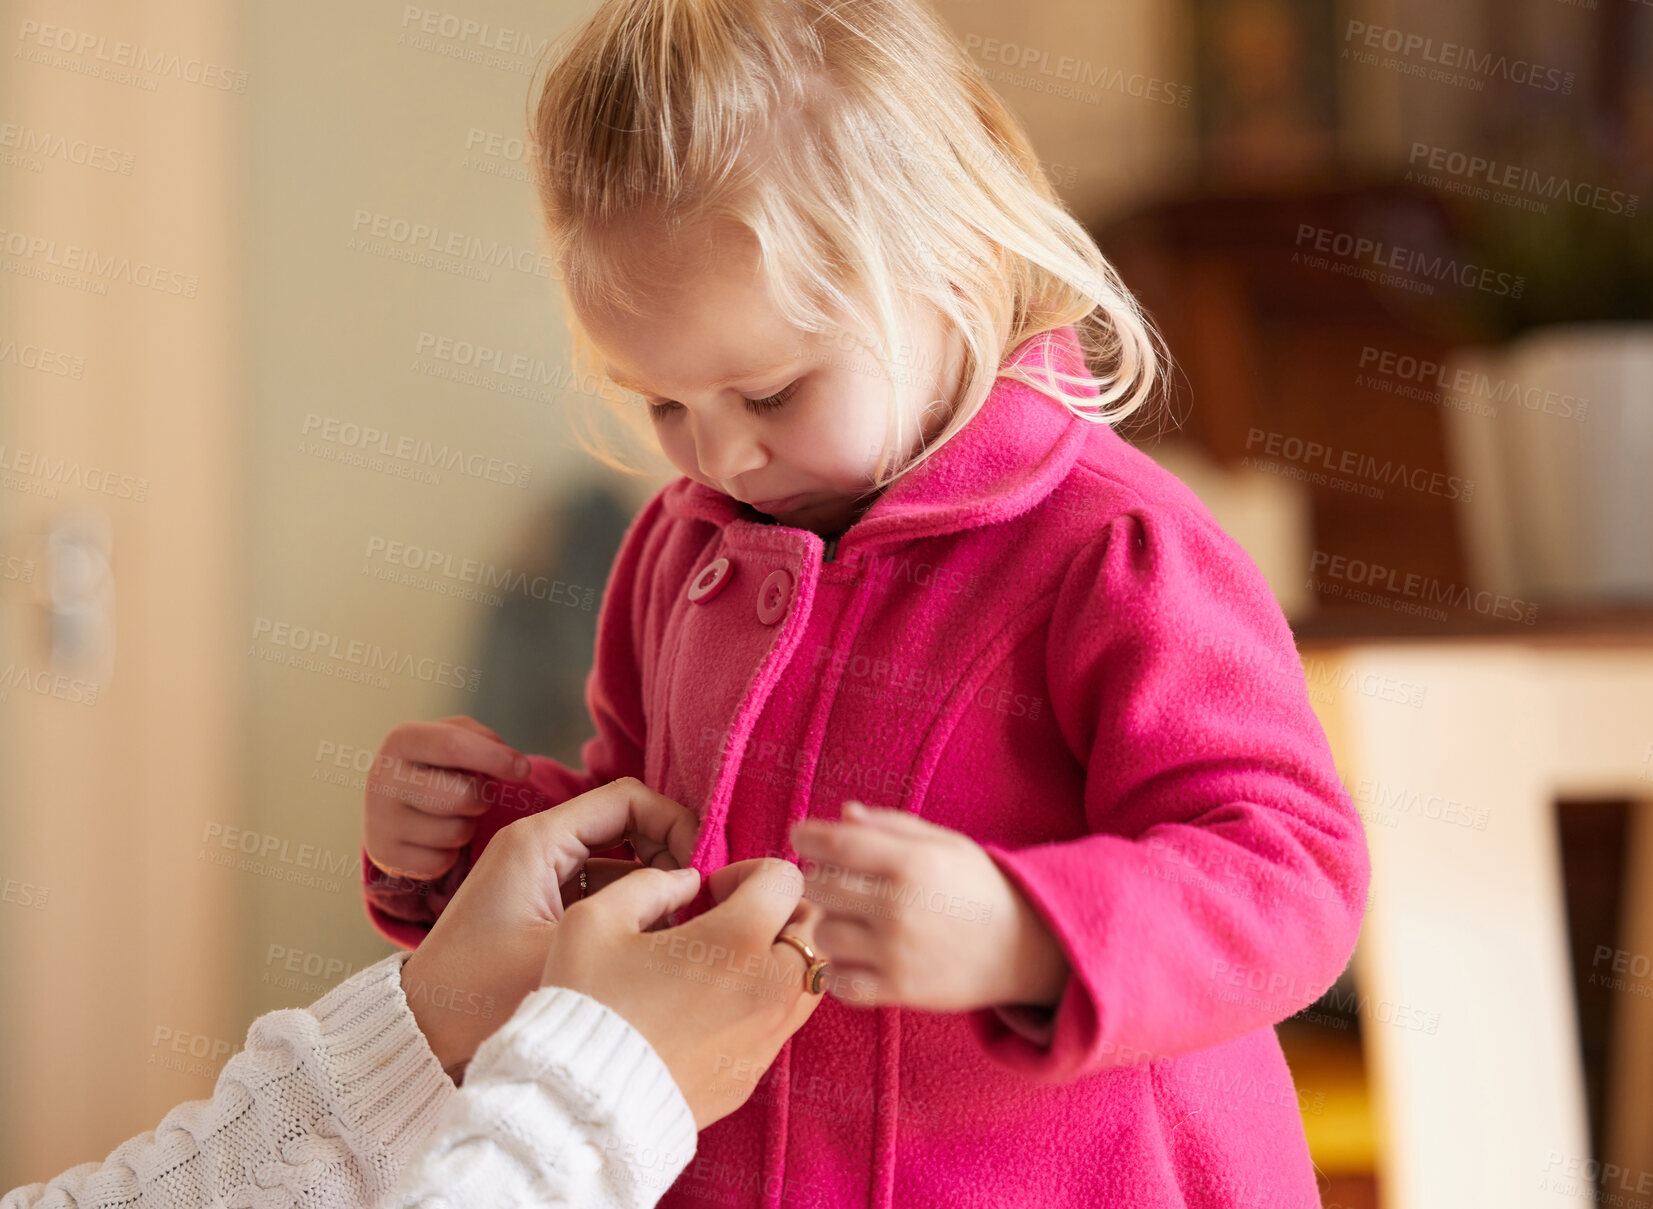 Buy stock photo Shot of a woman buttoning up her daughter's pink coat